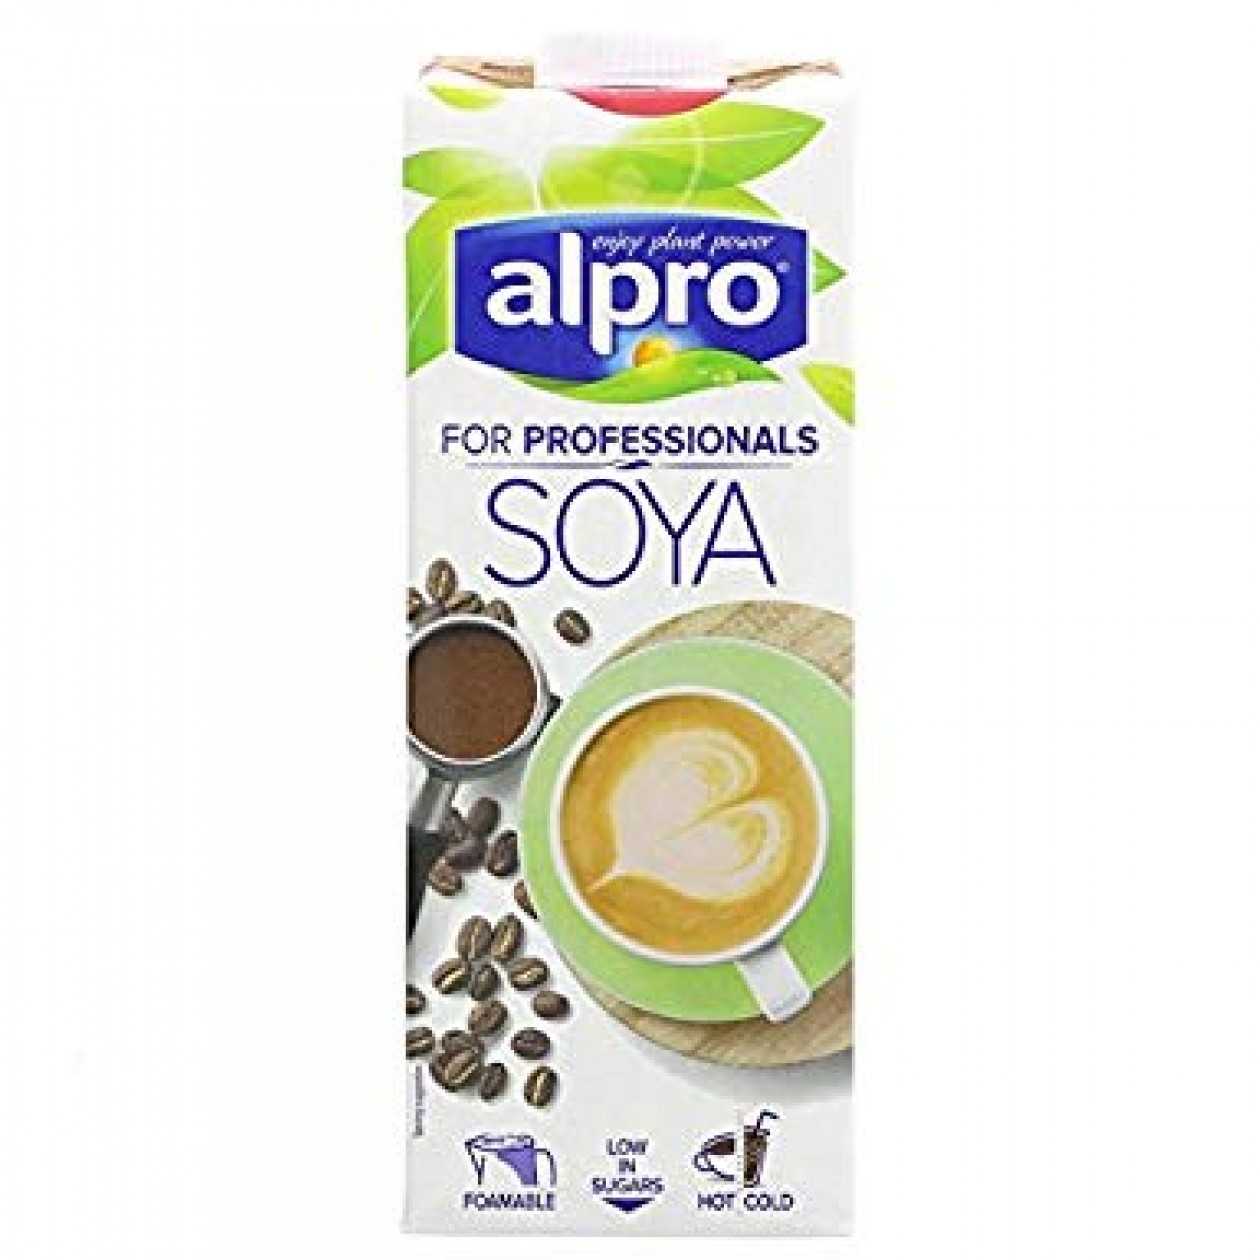 Alpro Soya for Professionals 1Lx12